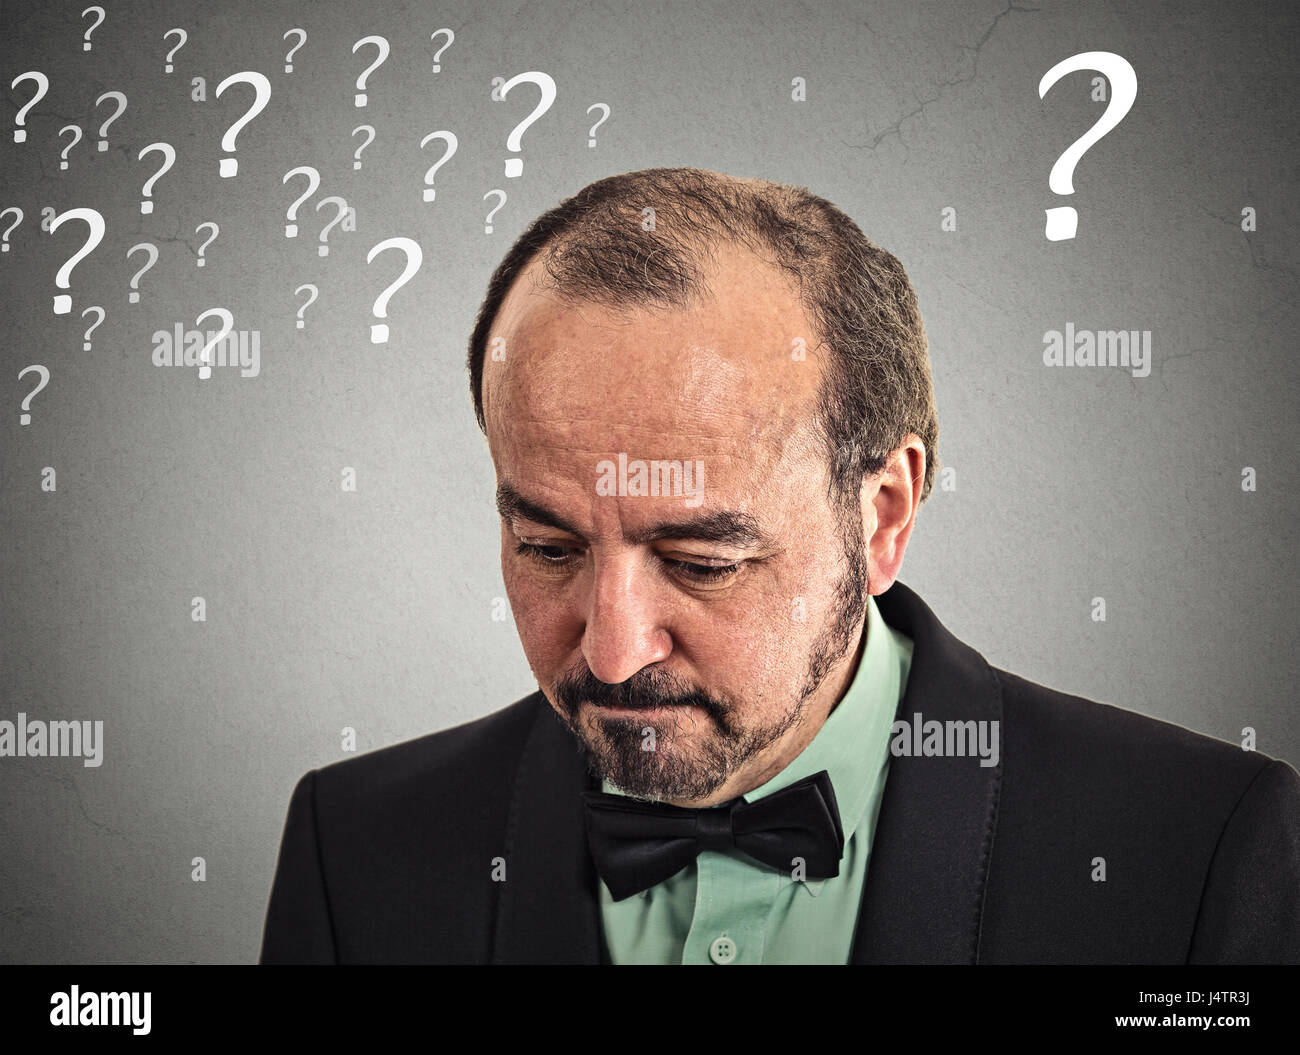 Closeup portrait headshot sad, depressed, desperate, alone, disappointed in life middle aged man looking down isolated grey wall background with quest Stock Photo